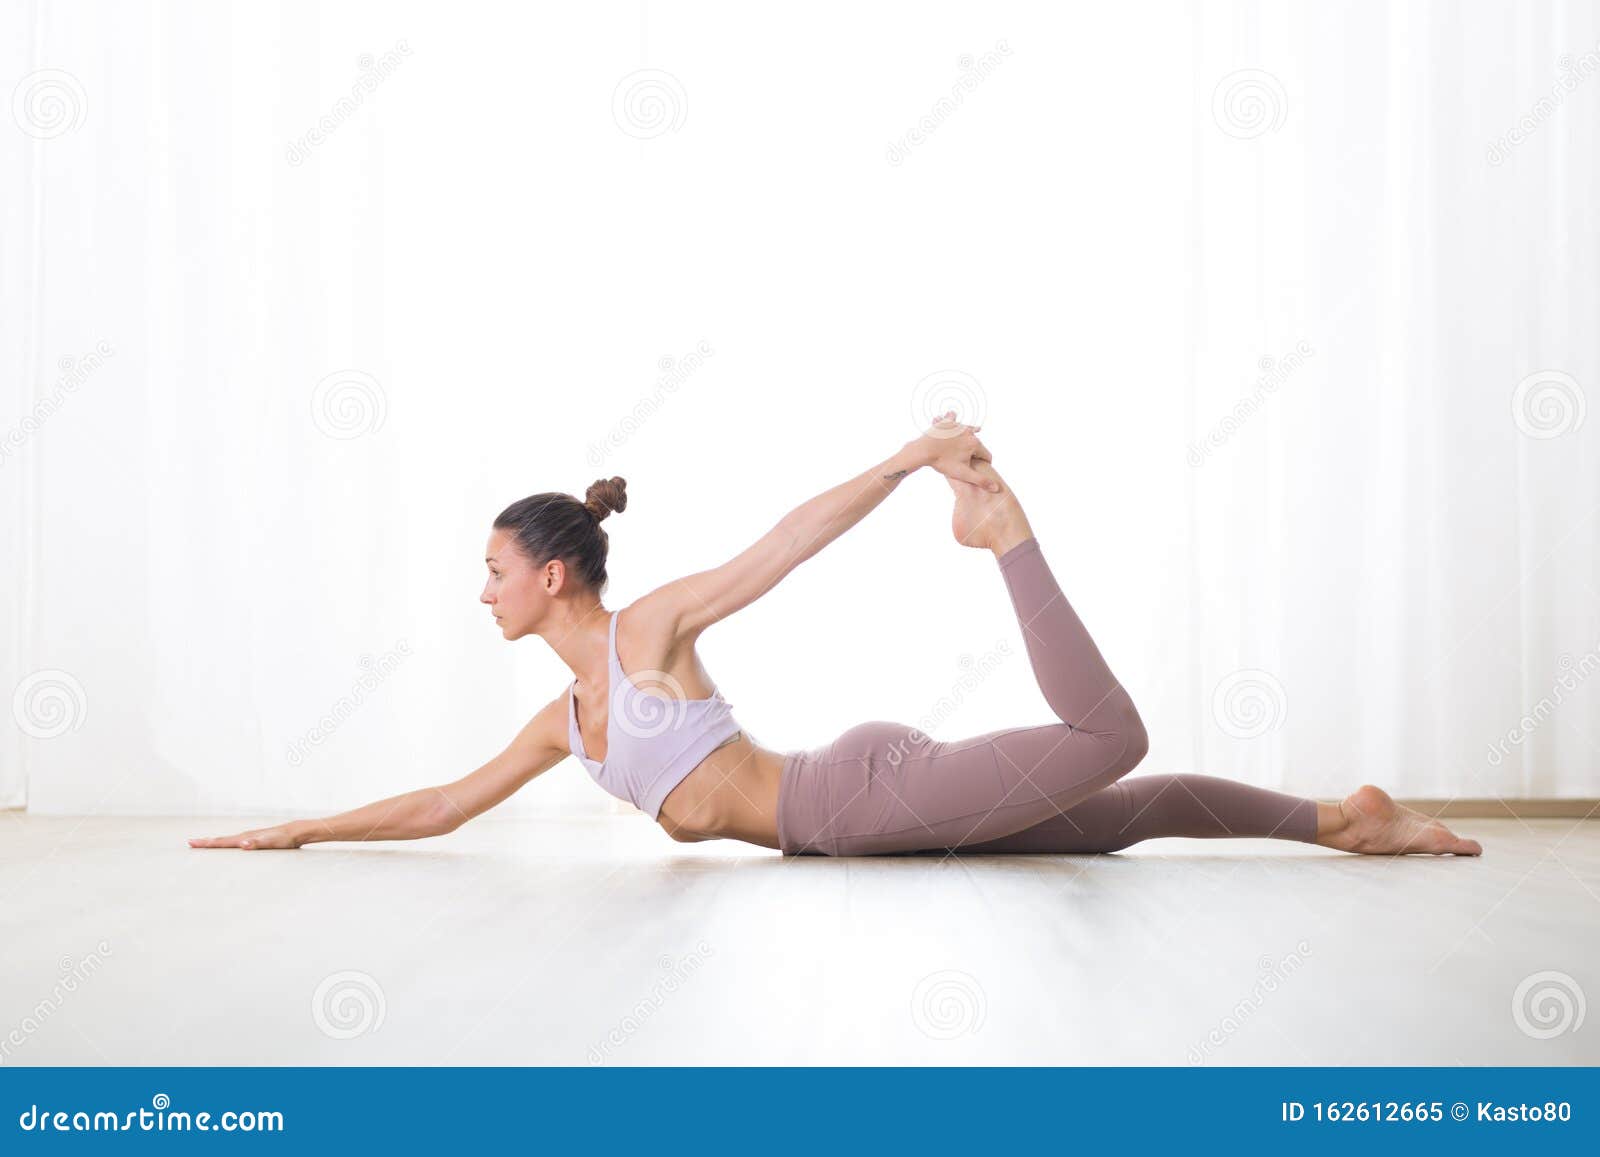 Ardha Chakrasana,also known as the Half Wheel Pose or Half Upward-Facing Bow  Pose, is a yoga asana that offers several physical and menta... | Instagram